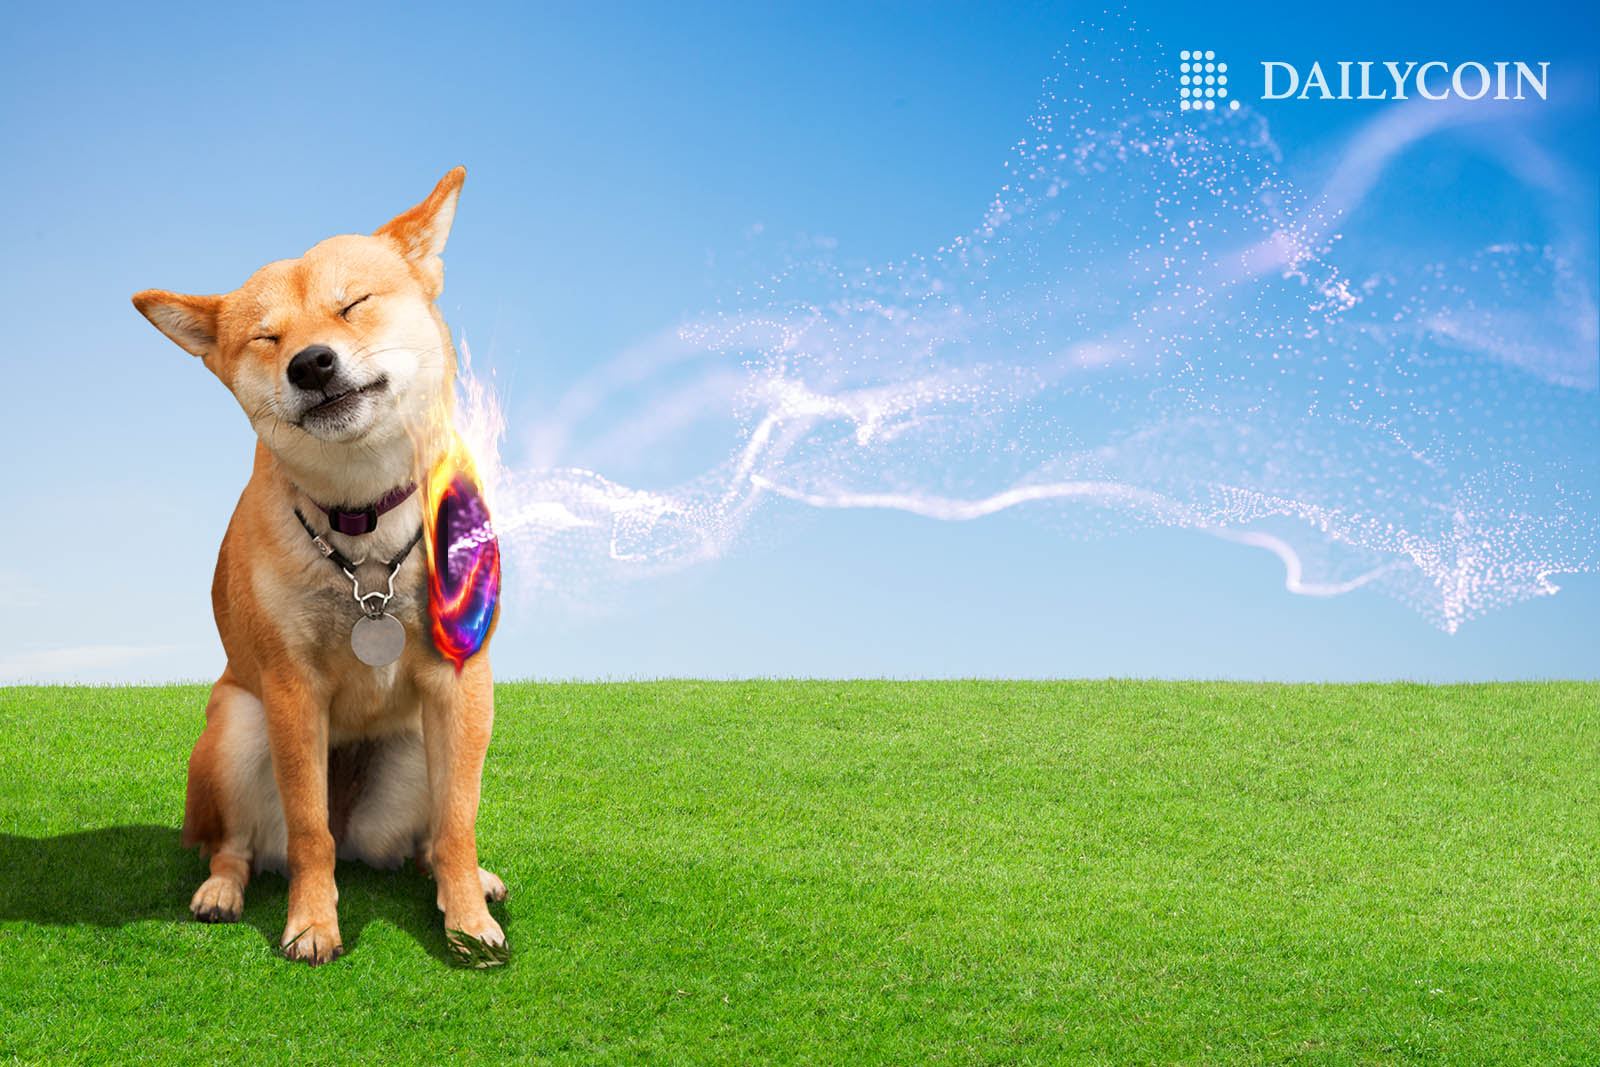 Shiba Inu dog squinting his eyes on a green field as particles are flying into the dog's body, heating things up for Shiba Inu.